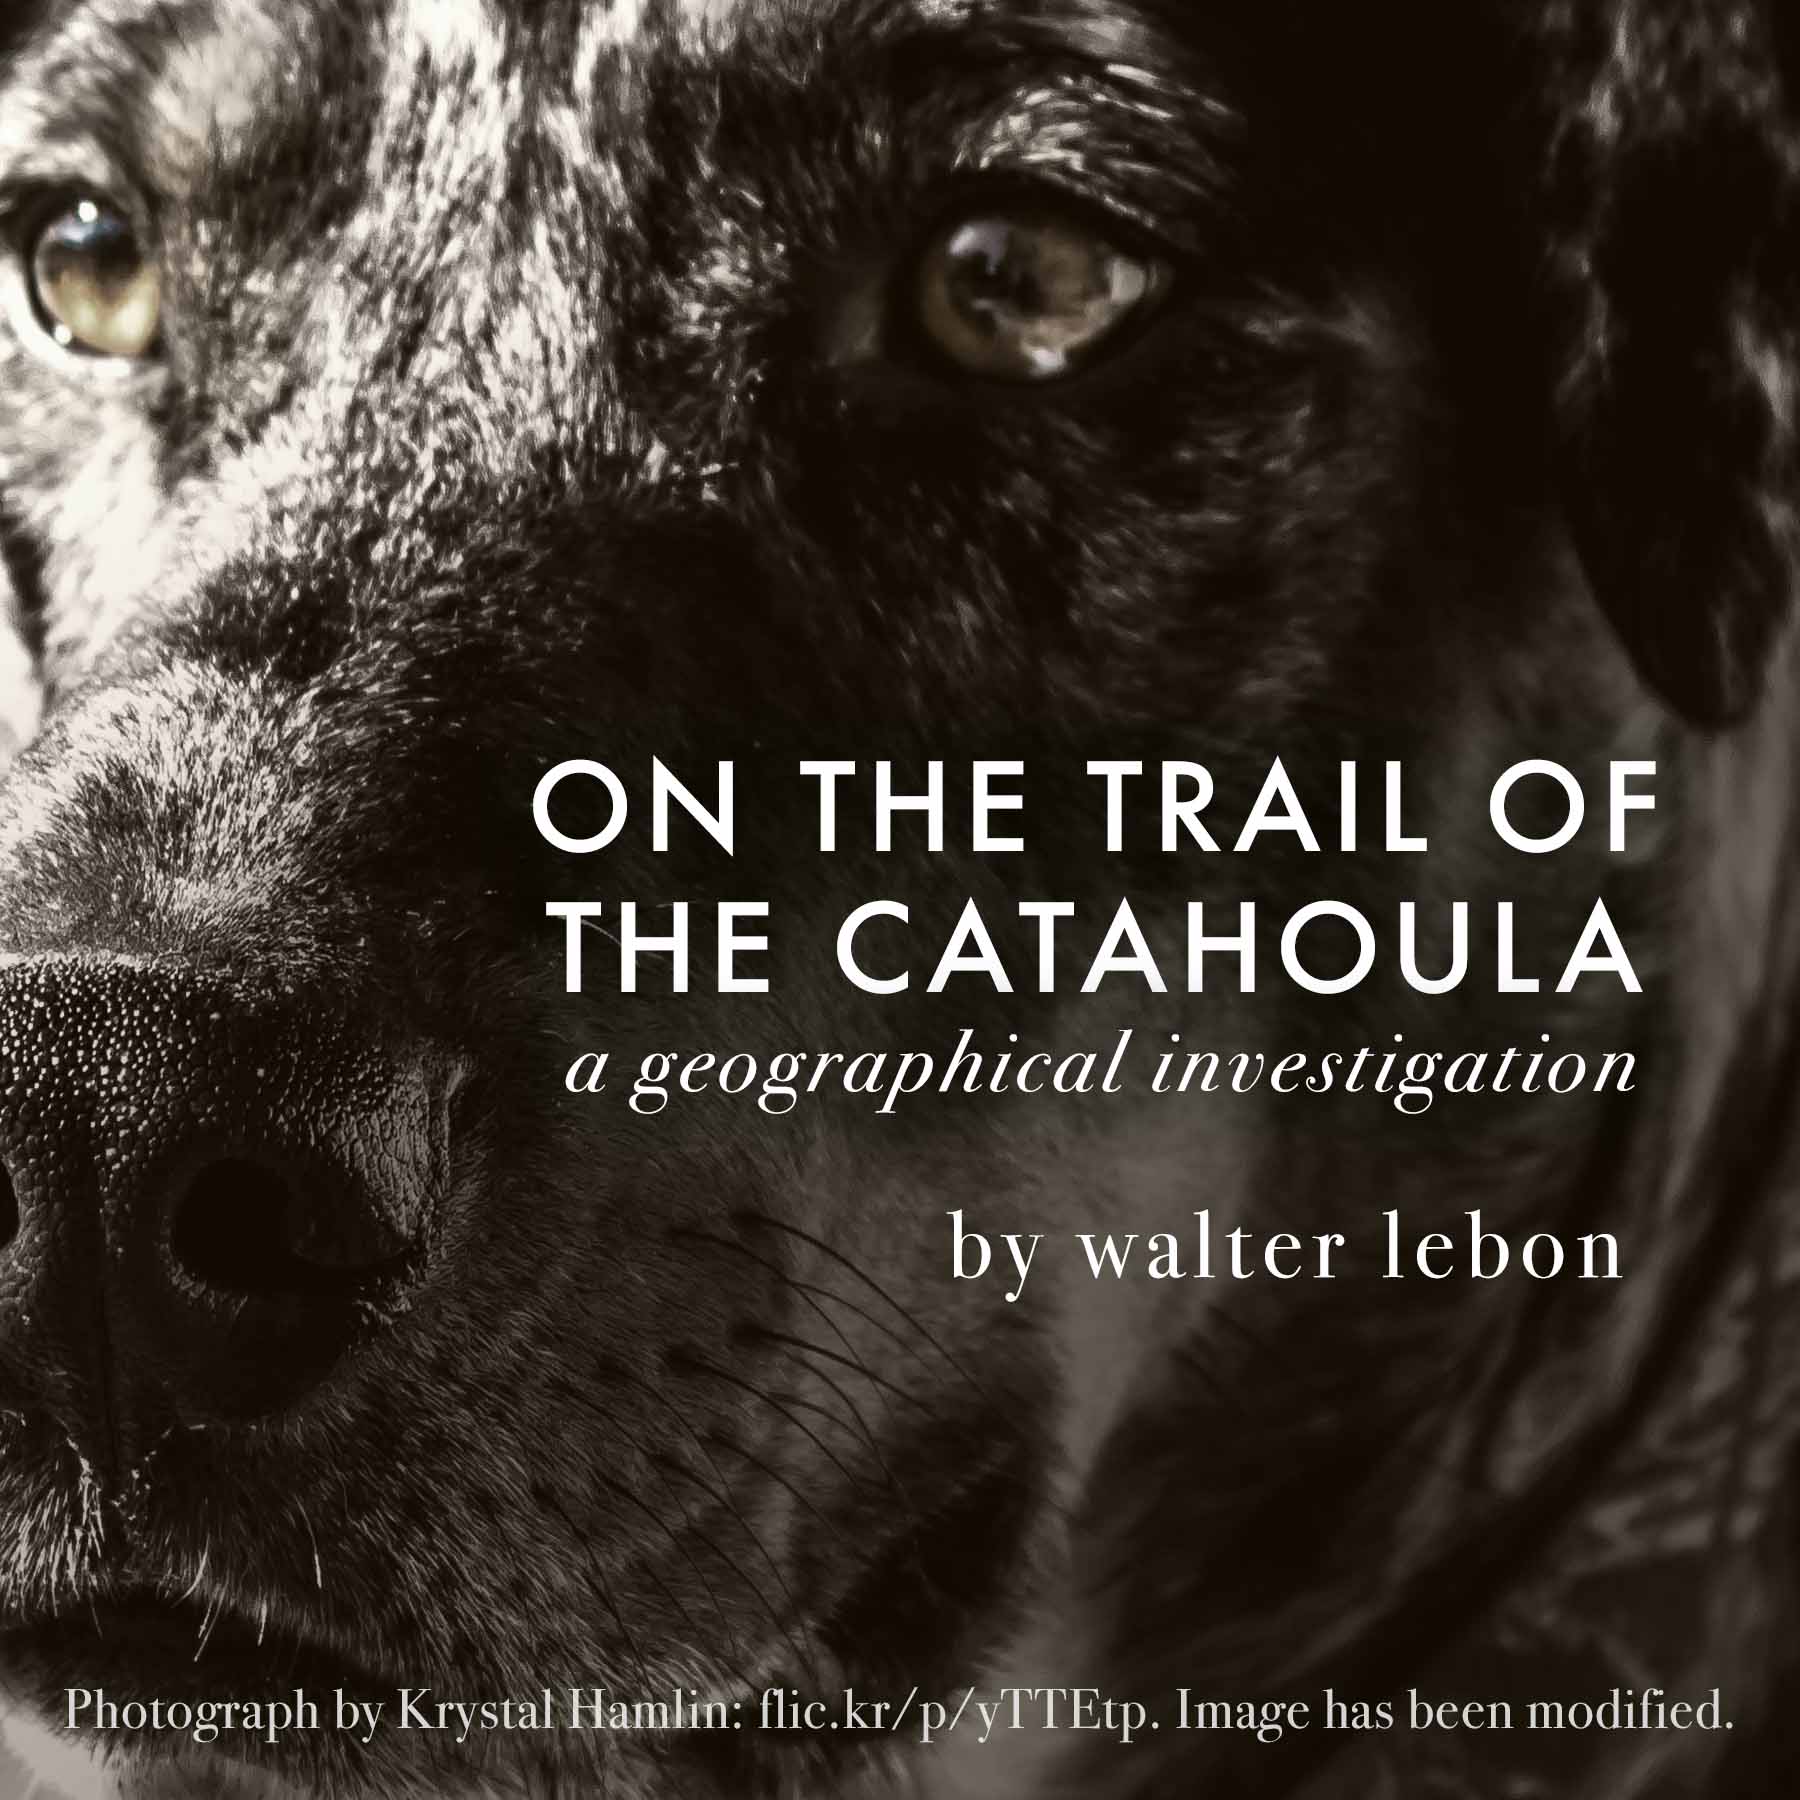 On the Trail of the Catahoula